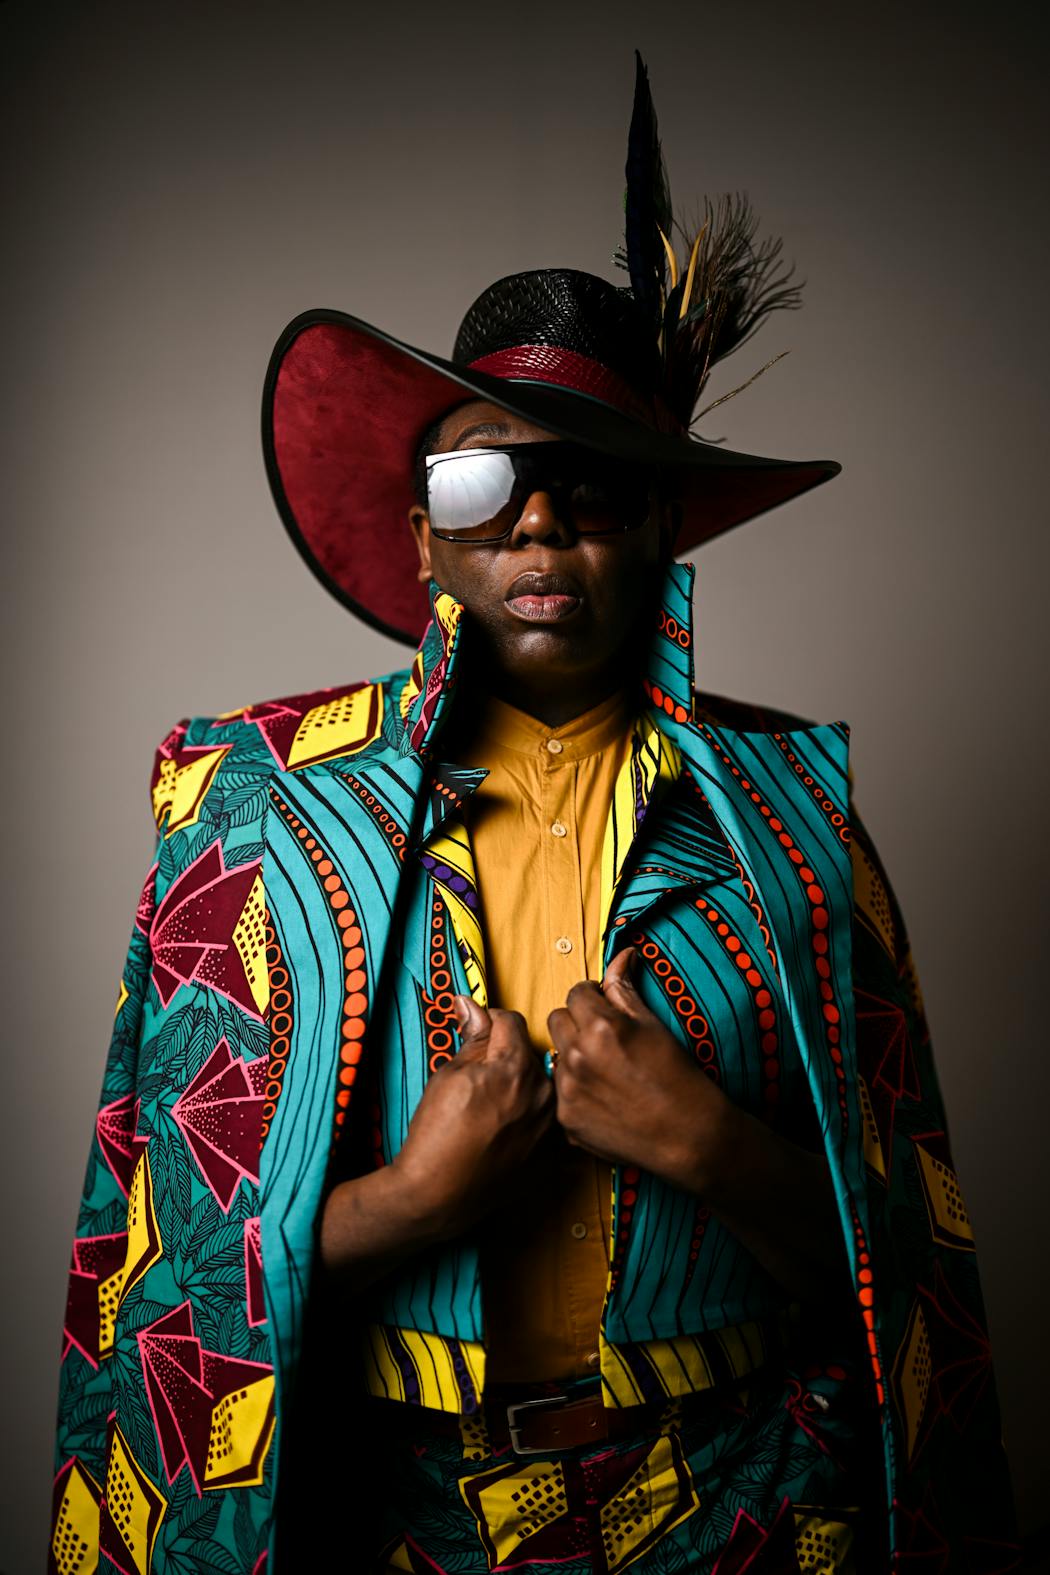 BeBe Zahara Benet, known for winning the first season of the reality-television show RuPaul’s Drag Race, paired a Hot Roz suit featuring Ankara prints of West Africa with a leather hat from Blonde Swan for his first Derby.  